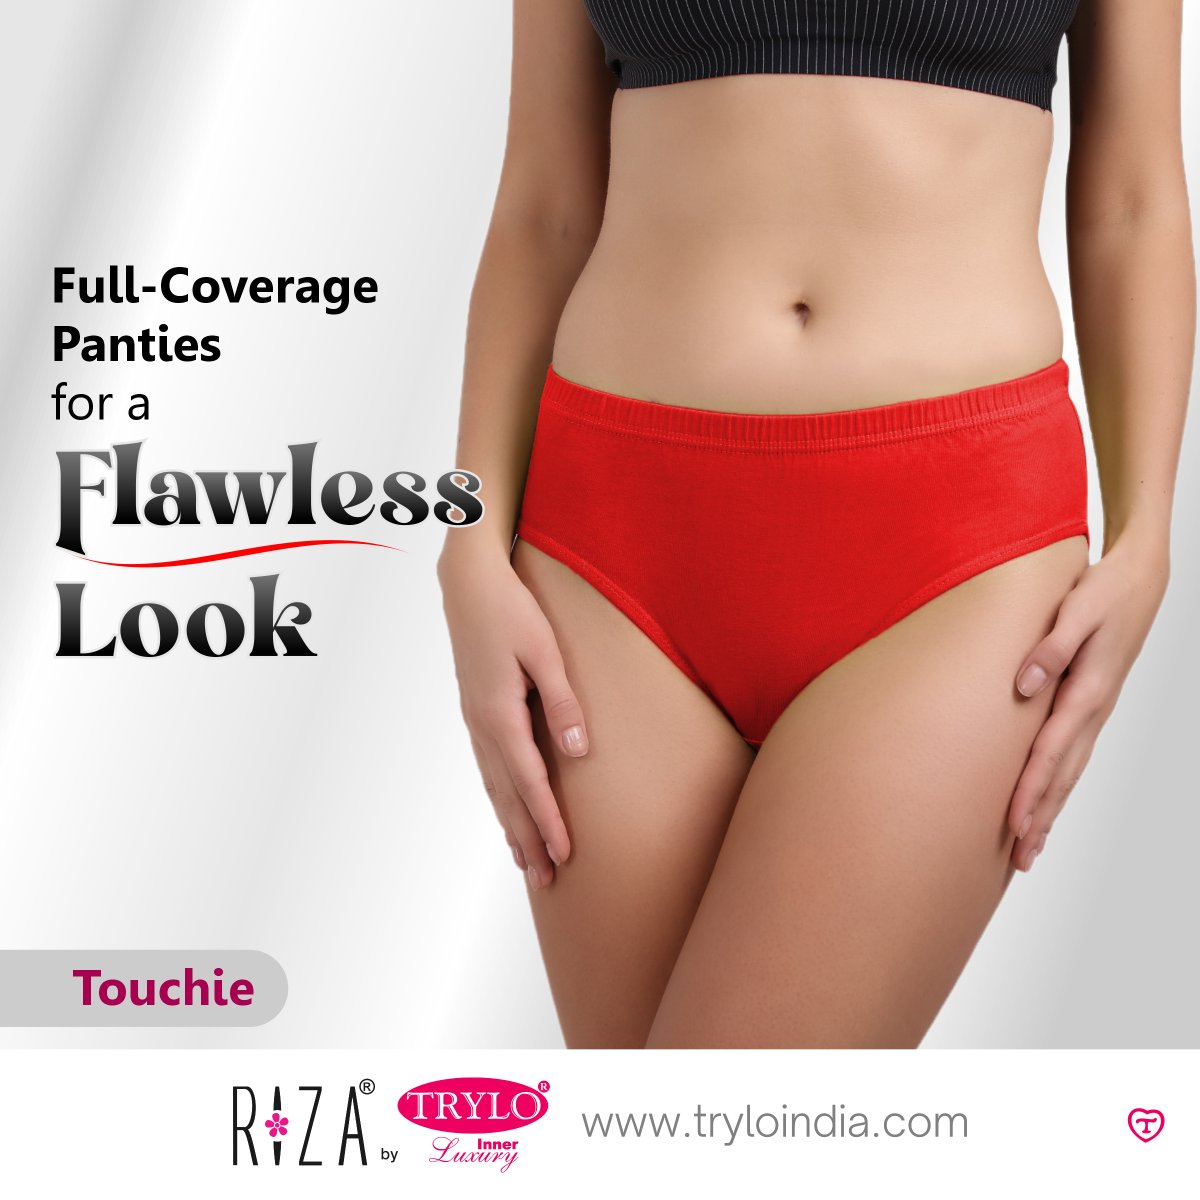 Experience comfort and confidence with Touchie's full-coverage panties.

Product Shown :-  Touchie Panty

#TryloIndia #TryloIntimates #RizaIntimates #RizabyTrylo #Touchiepanty #WardrobeEssential #EverydayComfort